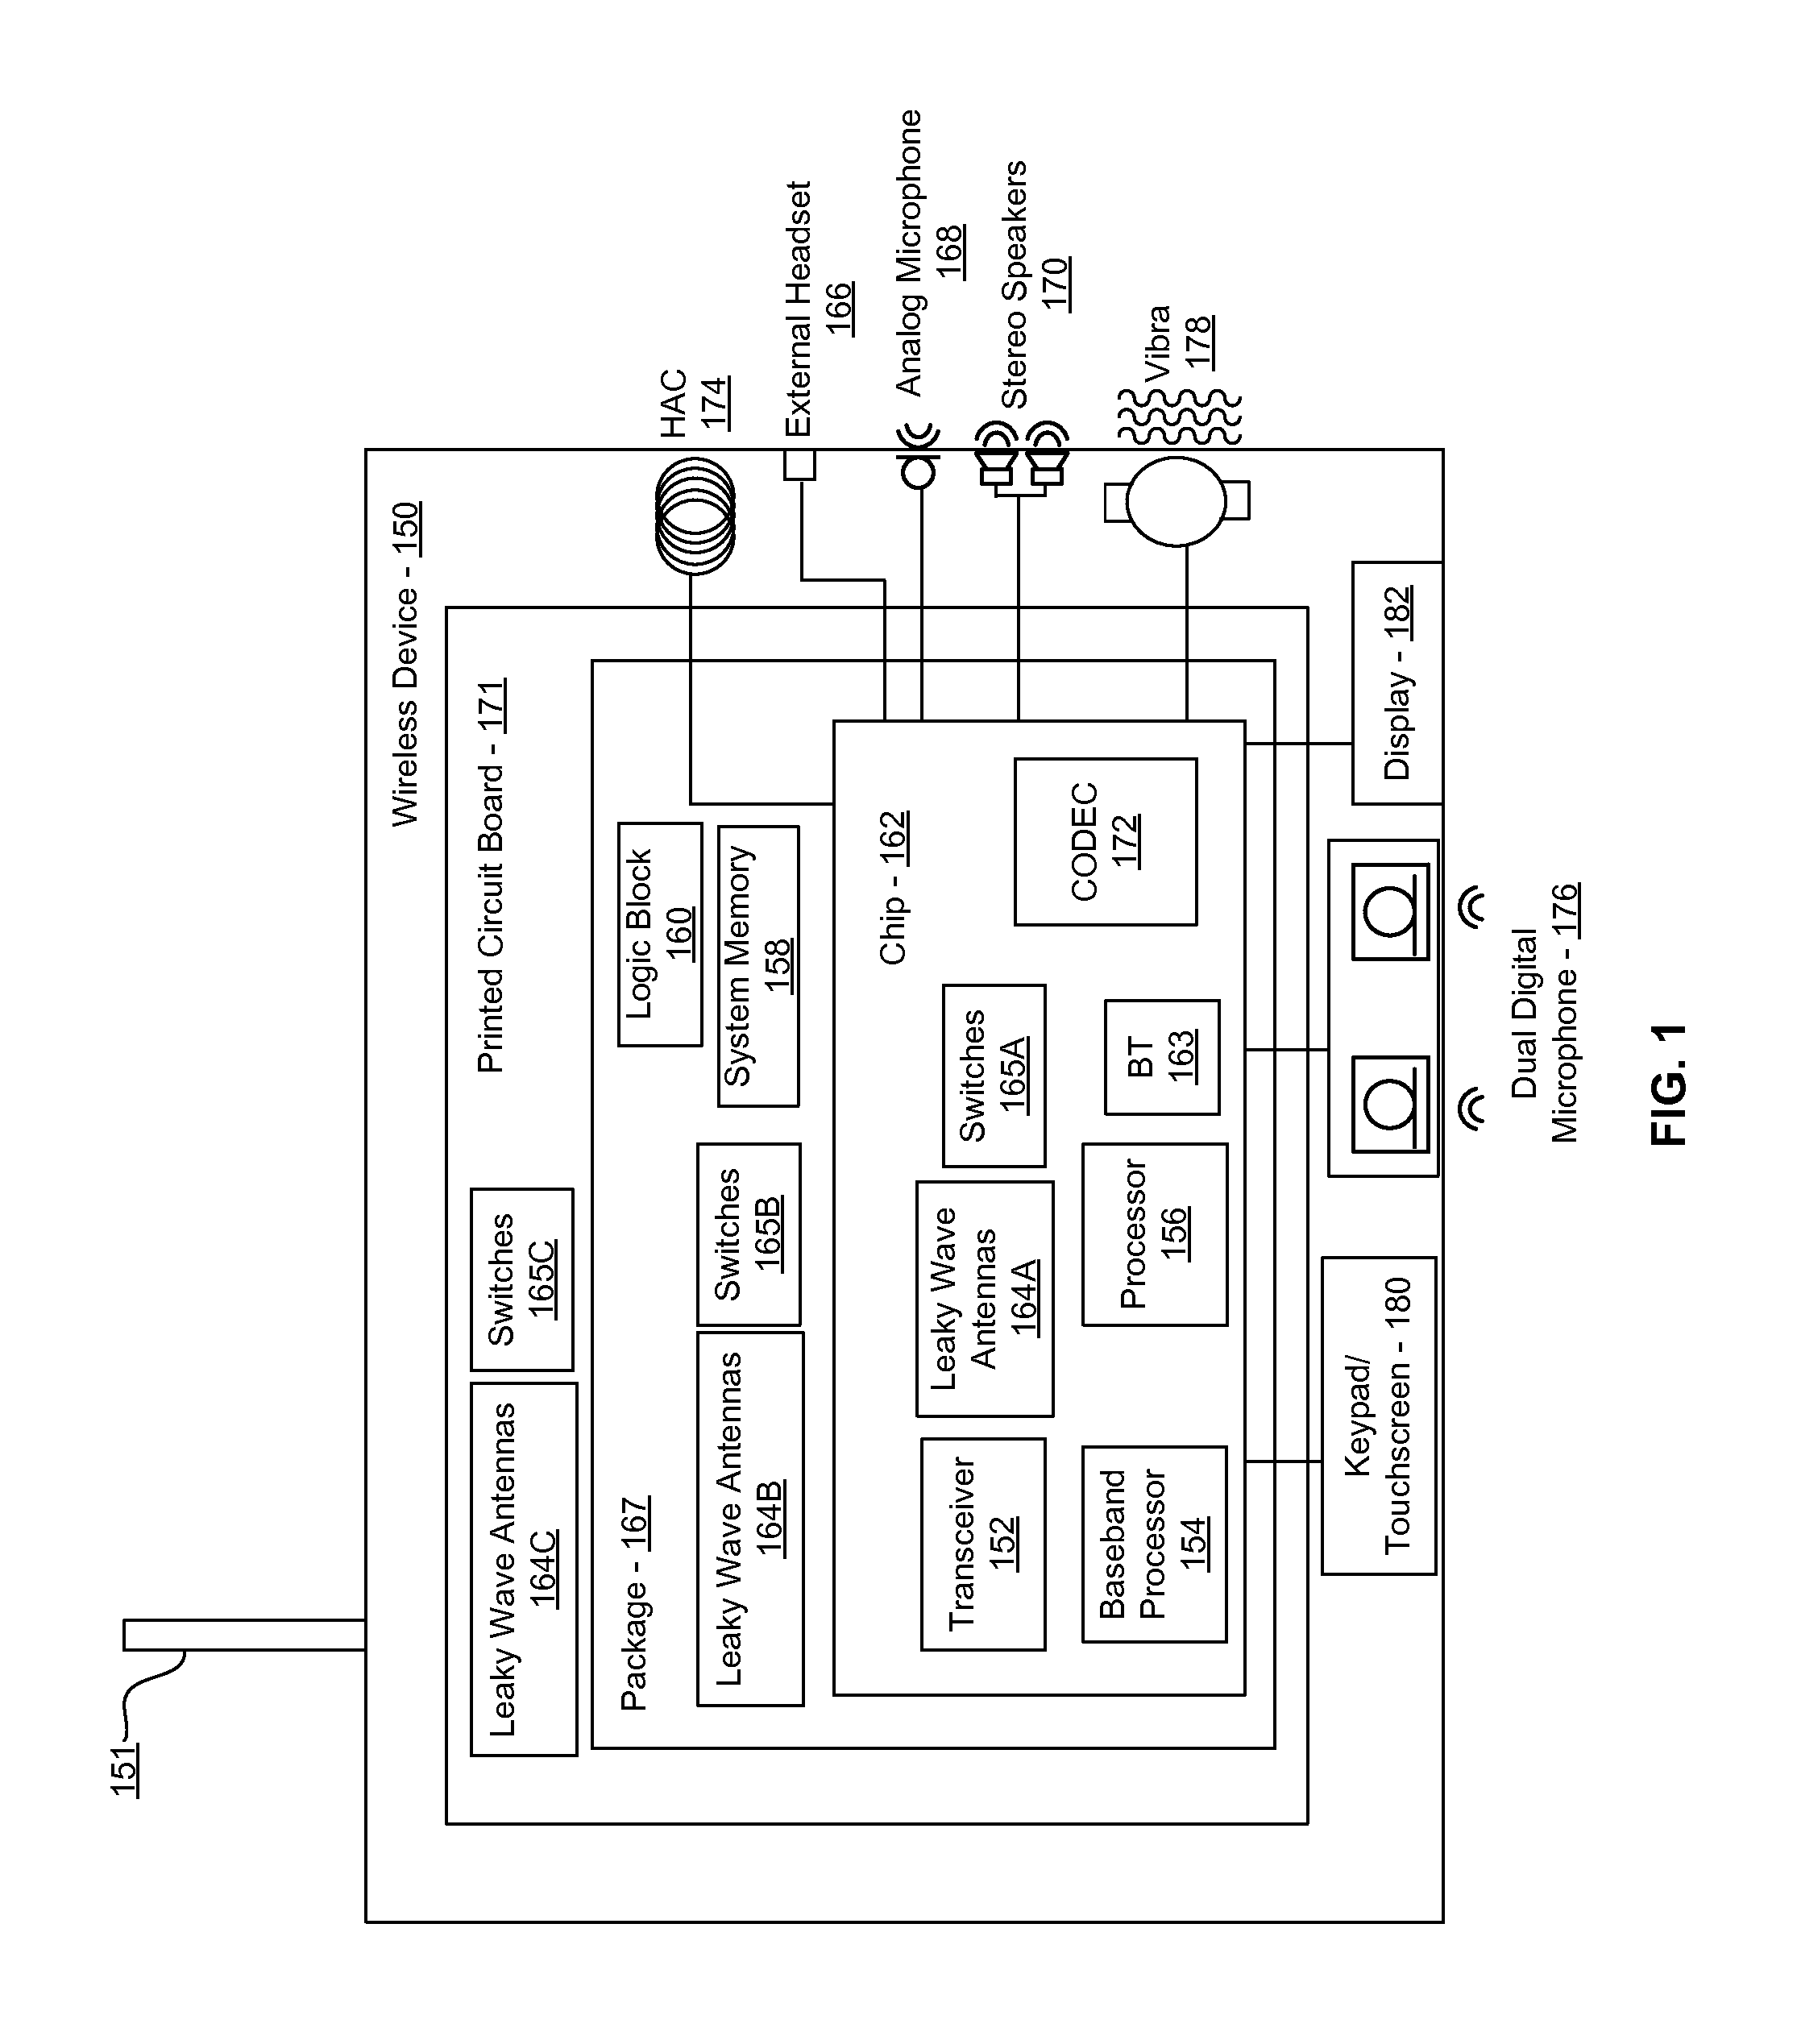 Method and system for communicating via leaky wave antennas on high resistivity substrates